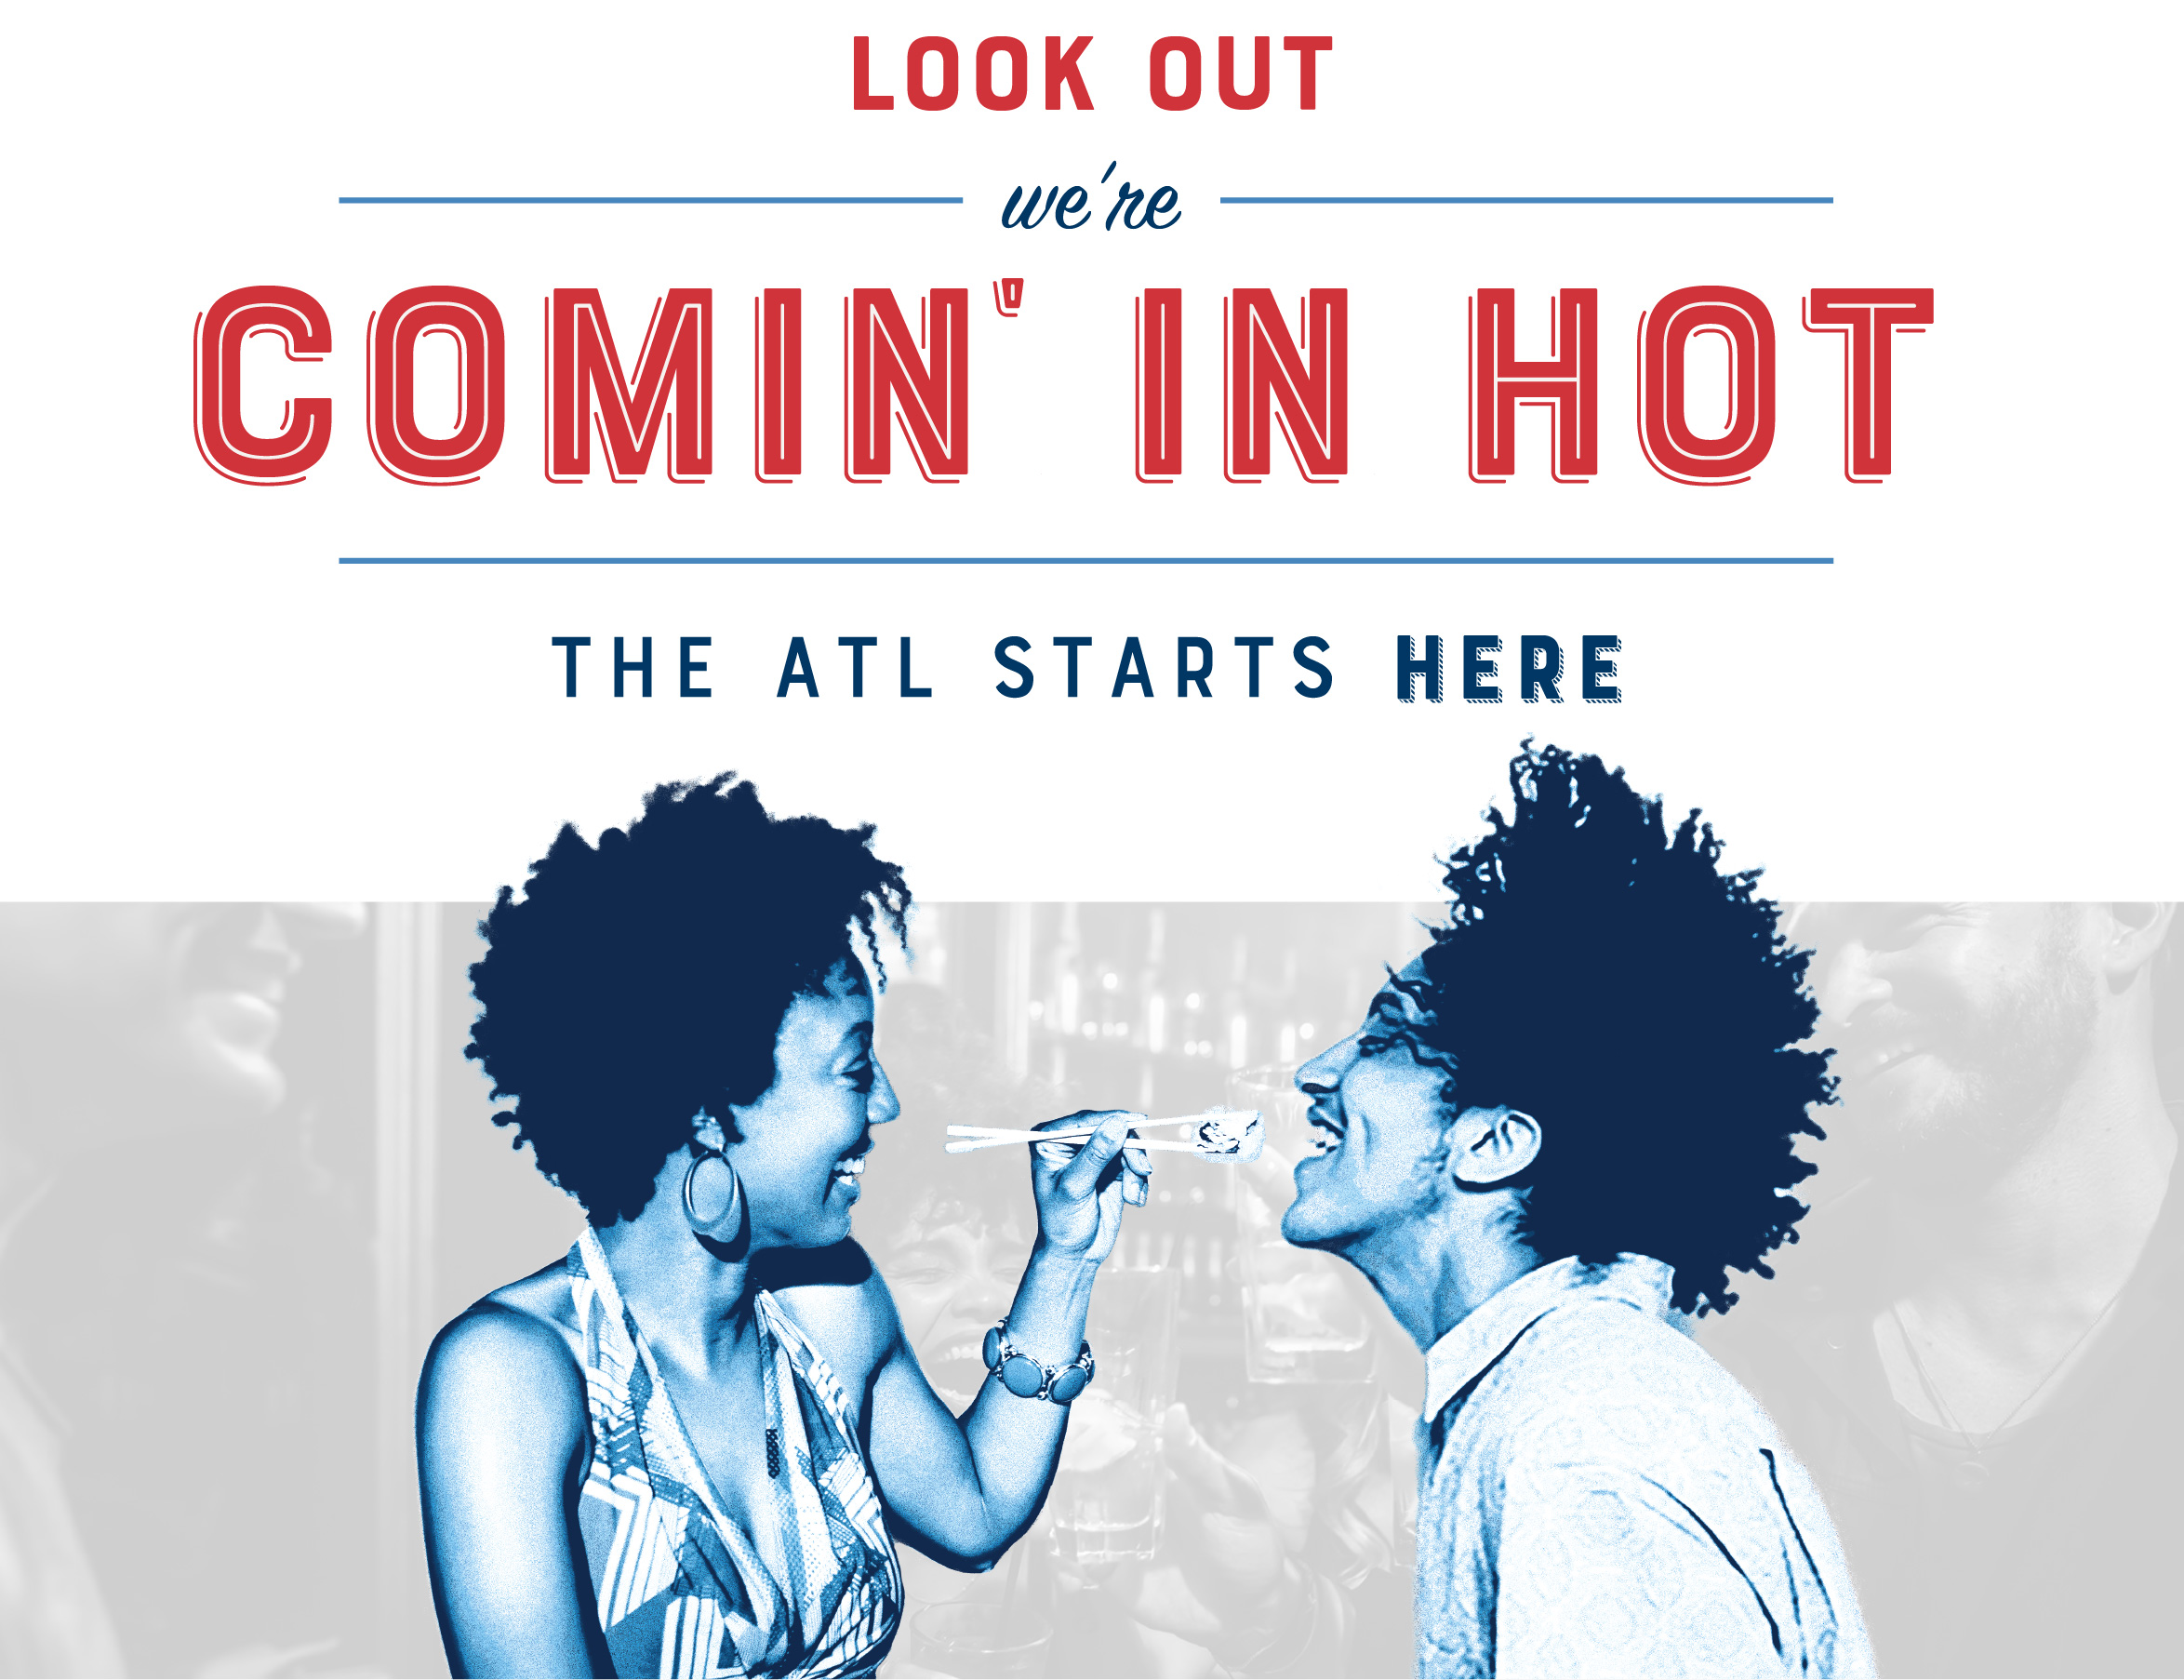 The ATL Starts Here